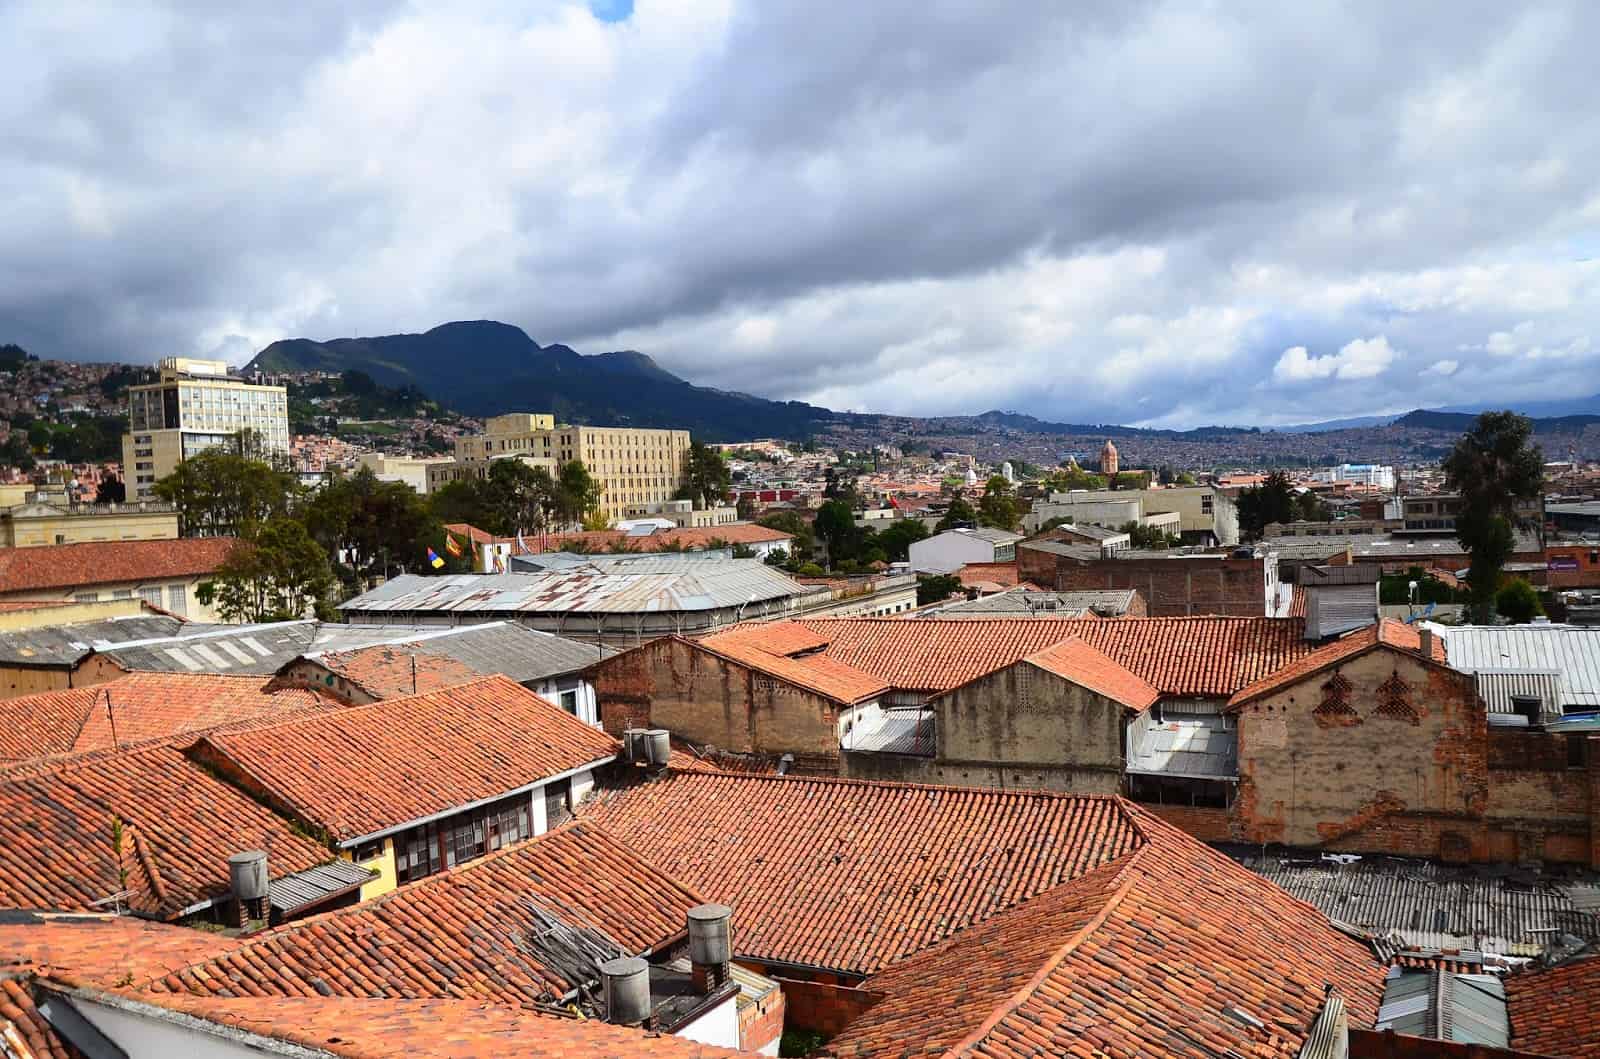 View from the rooftop of the National Police History Museum in La Candelaria, Bogotá, Colombia